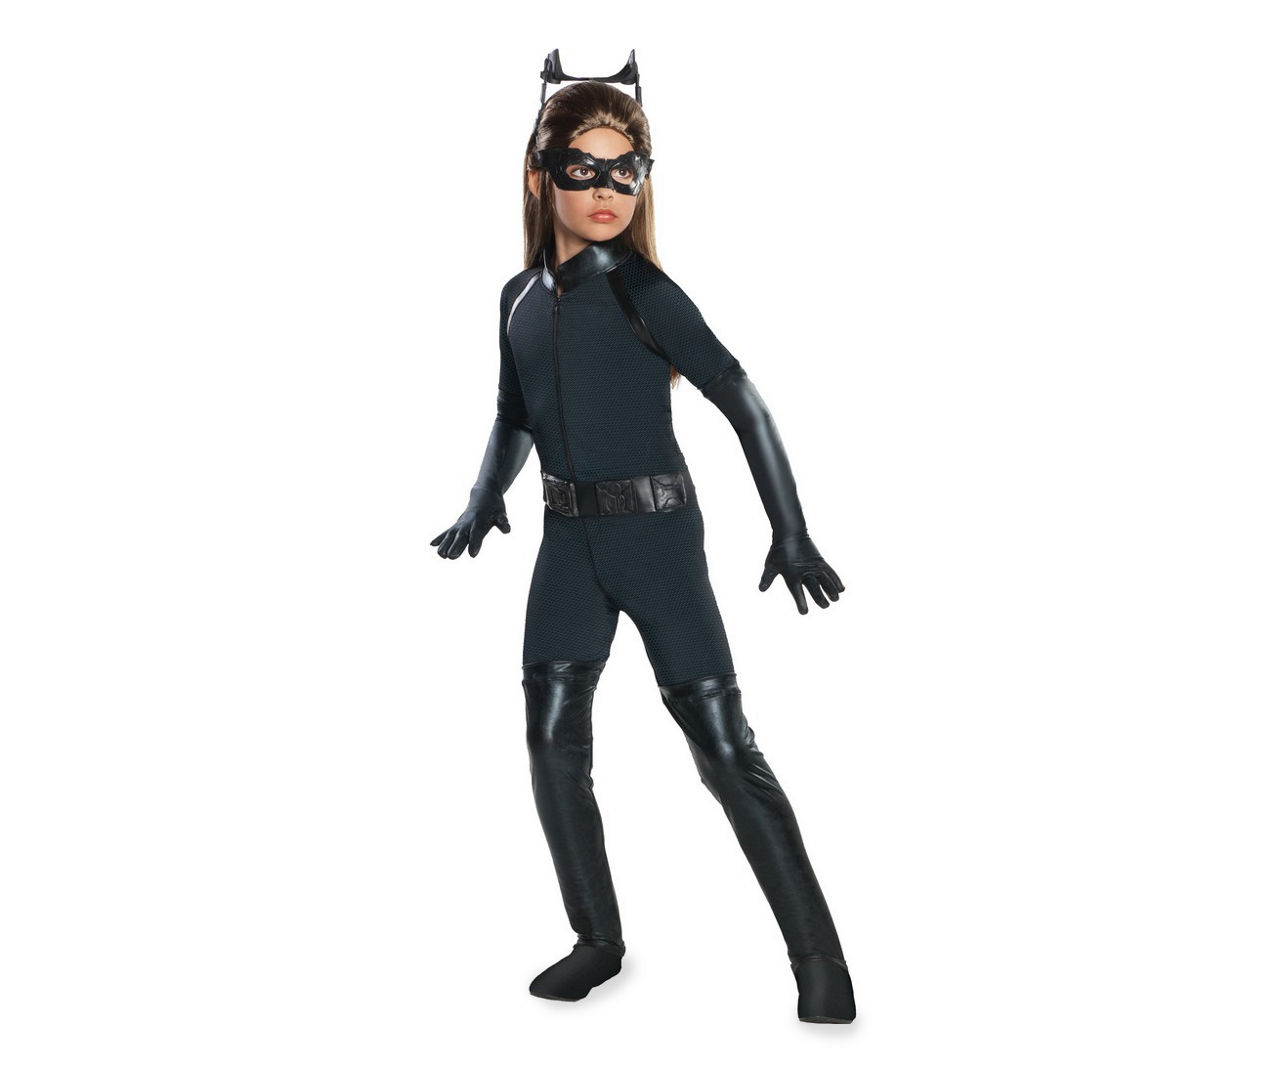 Kids Size M The Dark Knight Rises Deluxe Catwoman Costume